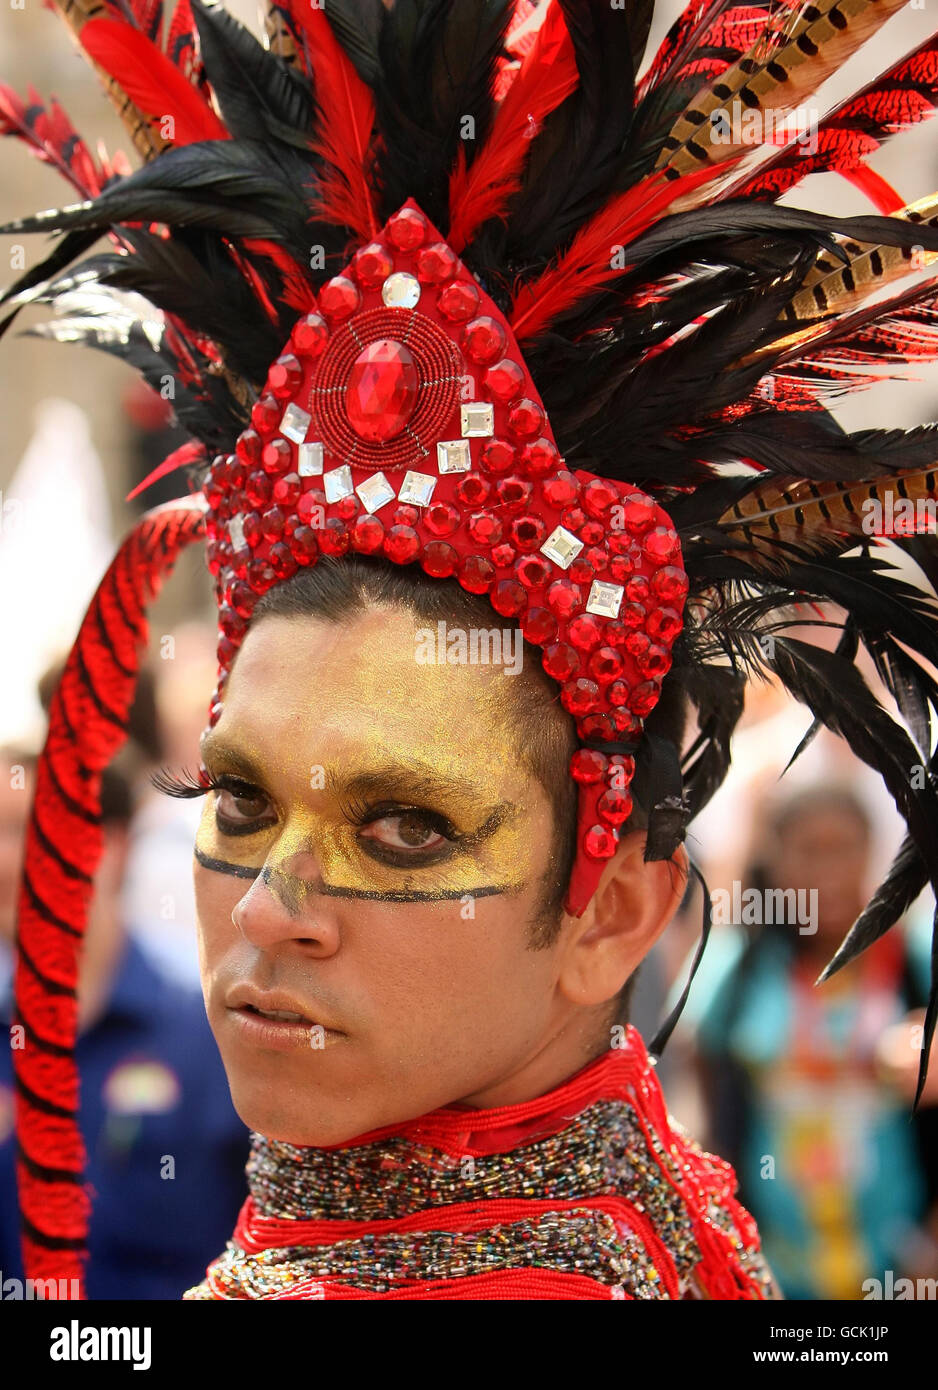 A reveller takes part in the annual Gay Pride parade, in central London. Stock Photo